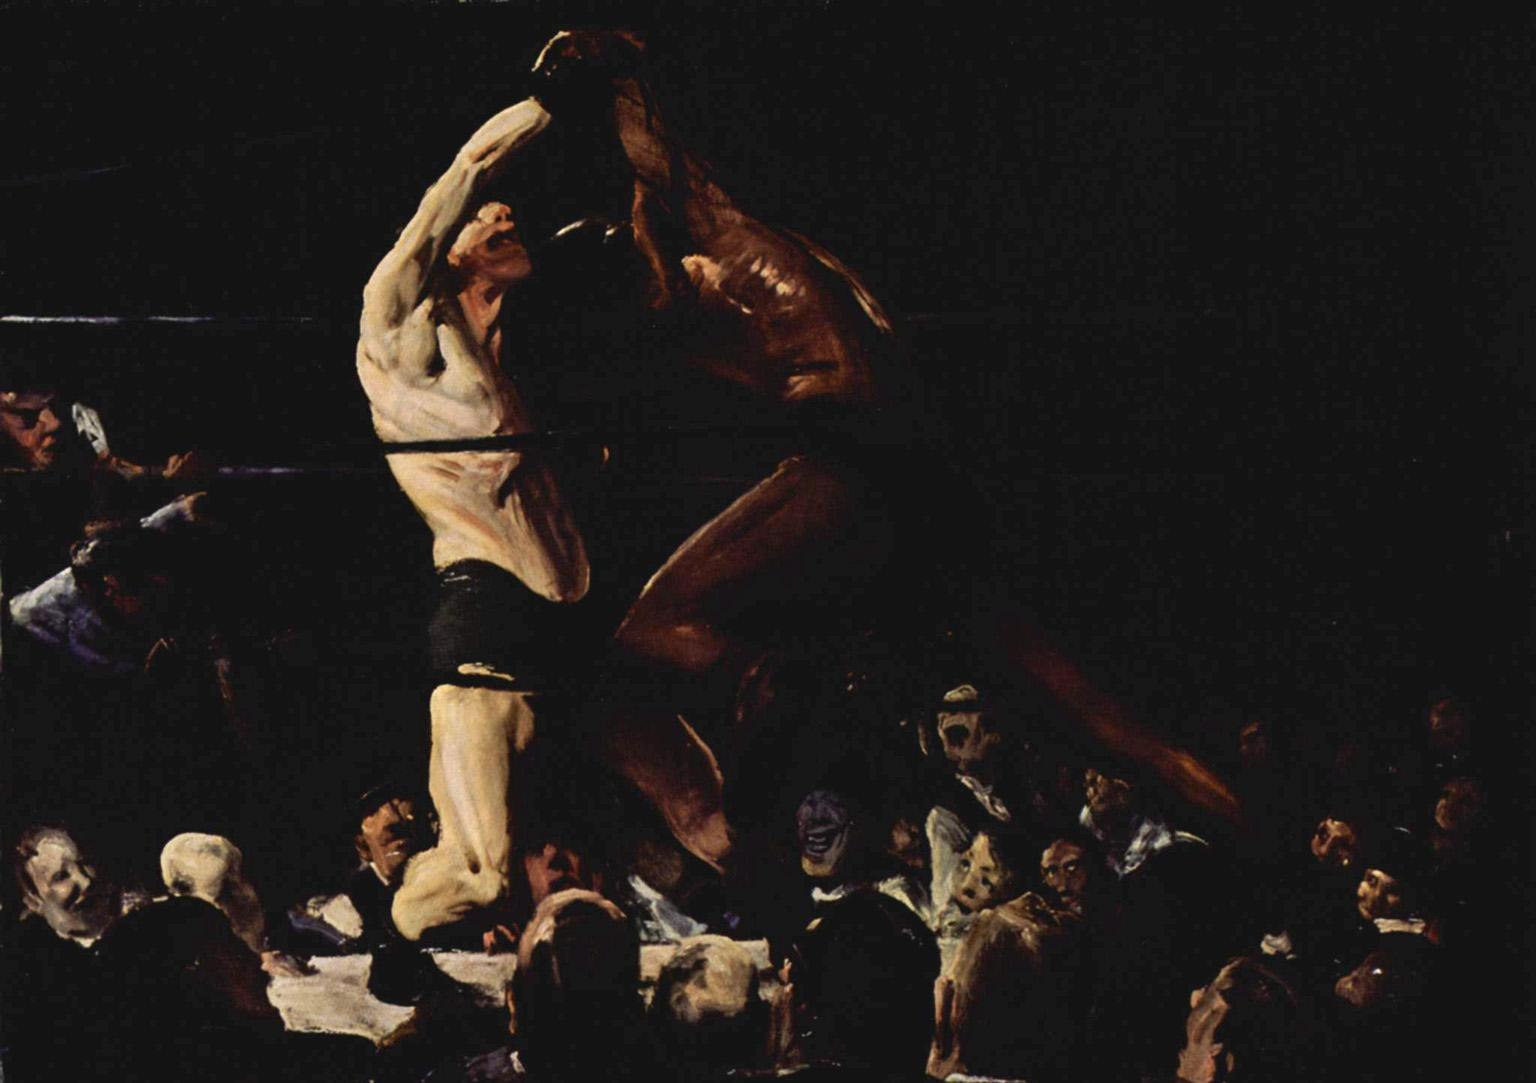 George Bellows Both Members of This Club